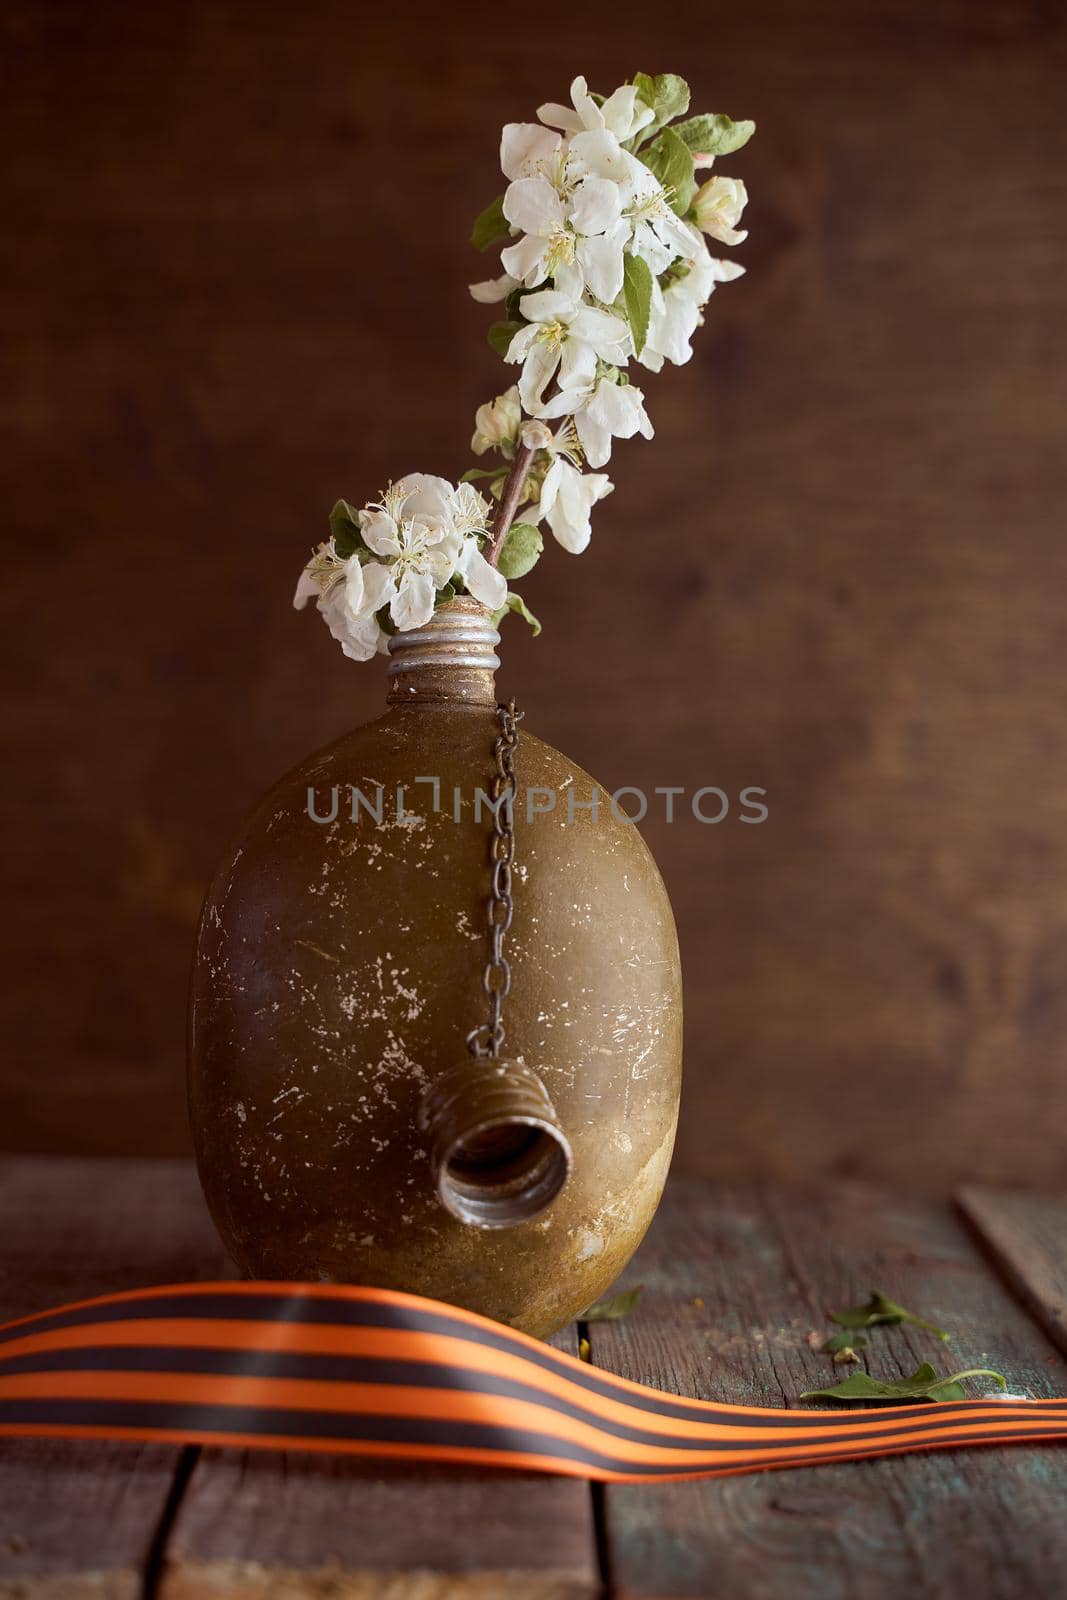 A sprig of an apple tree in a soldier's flask on a brown background. Photo by May 9. High quality photo